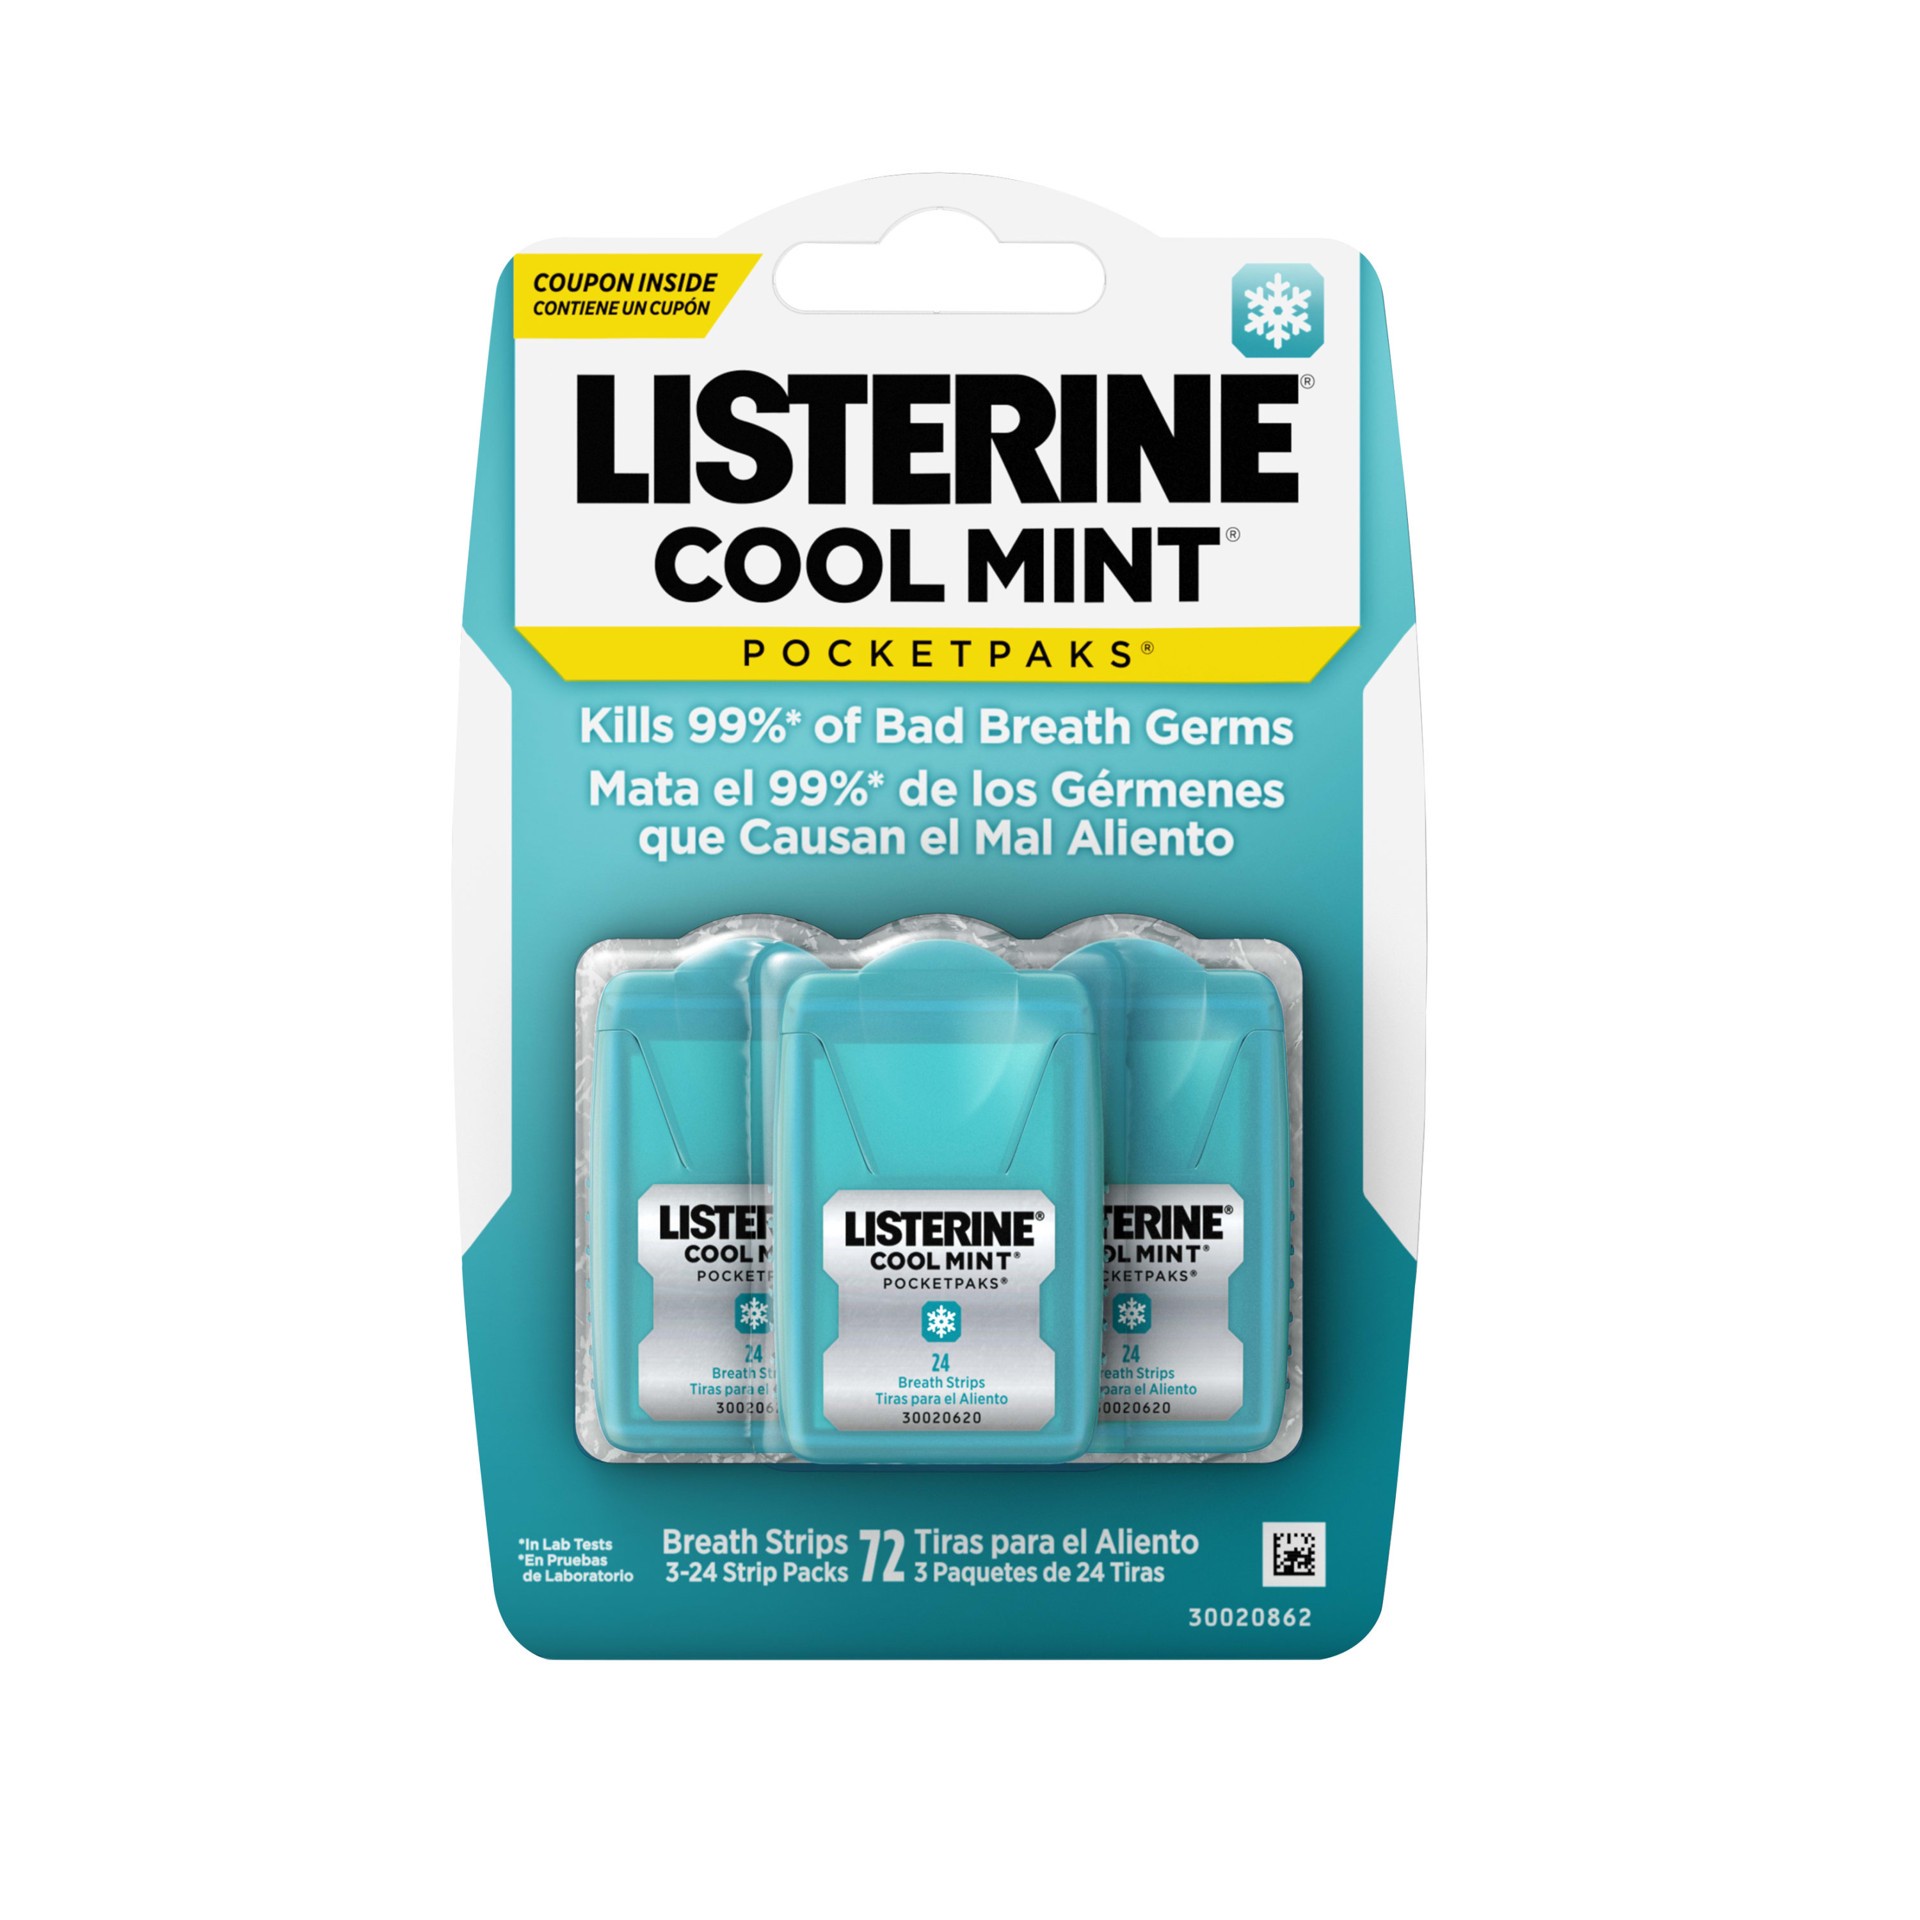 slide 1 of 6, Listerine Cool Mint PocketPaks Portable Breath Strips for Bad Breath, Fresh Breath Strips Dissolve Instantly to Kill 99% of Bad Breath Germs* On-the-Go, Cool Mint, 24-Strip Pack, 3 Pack, 72 ct